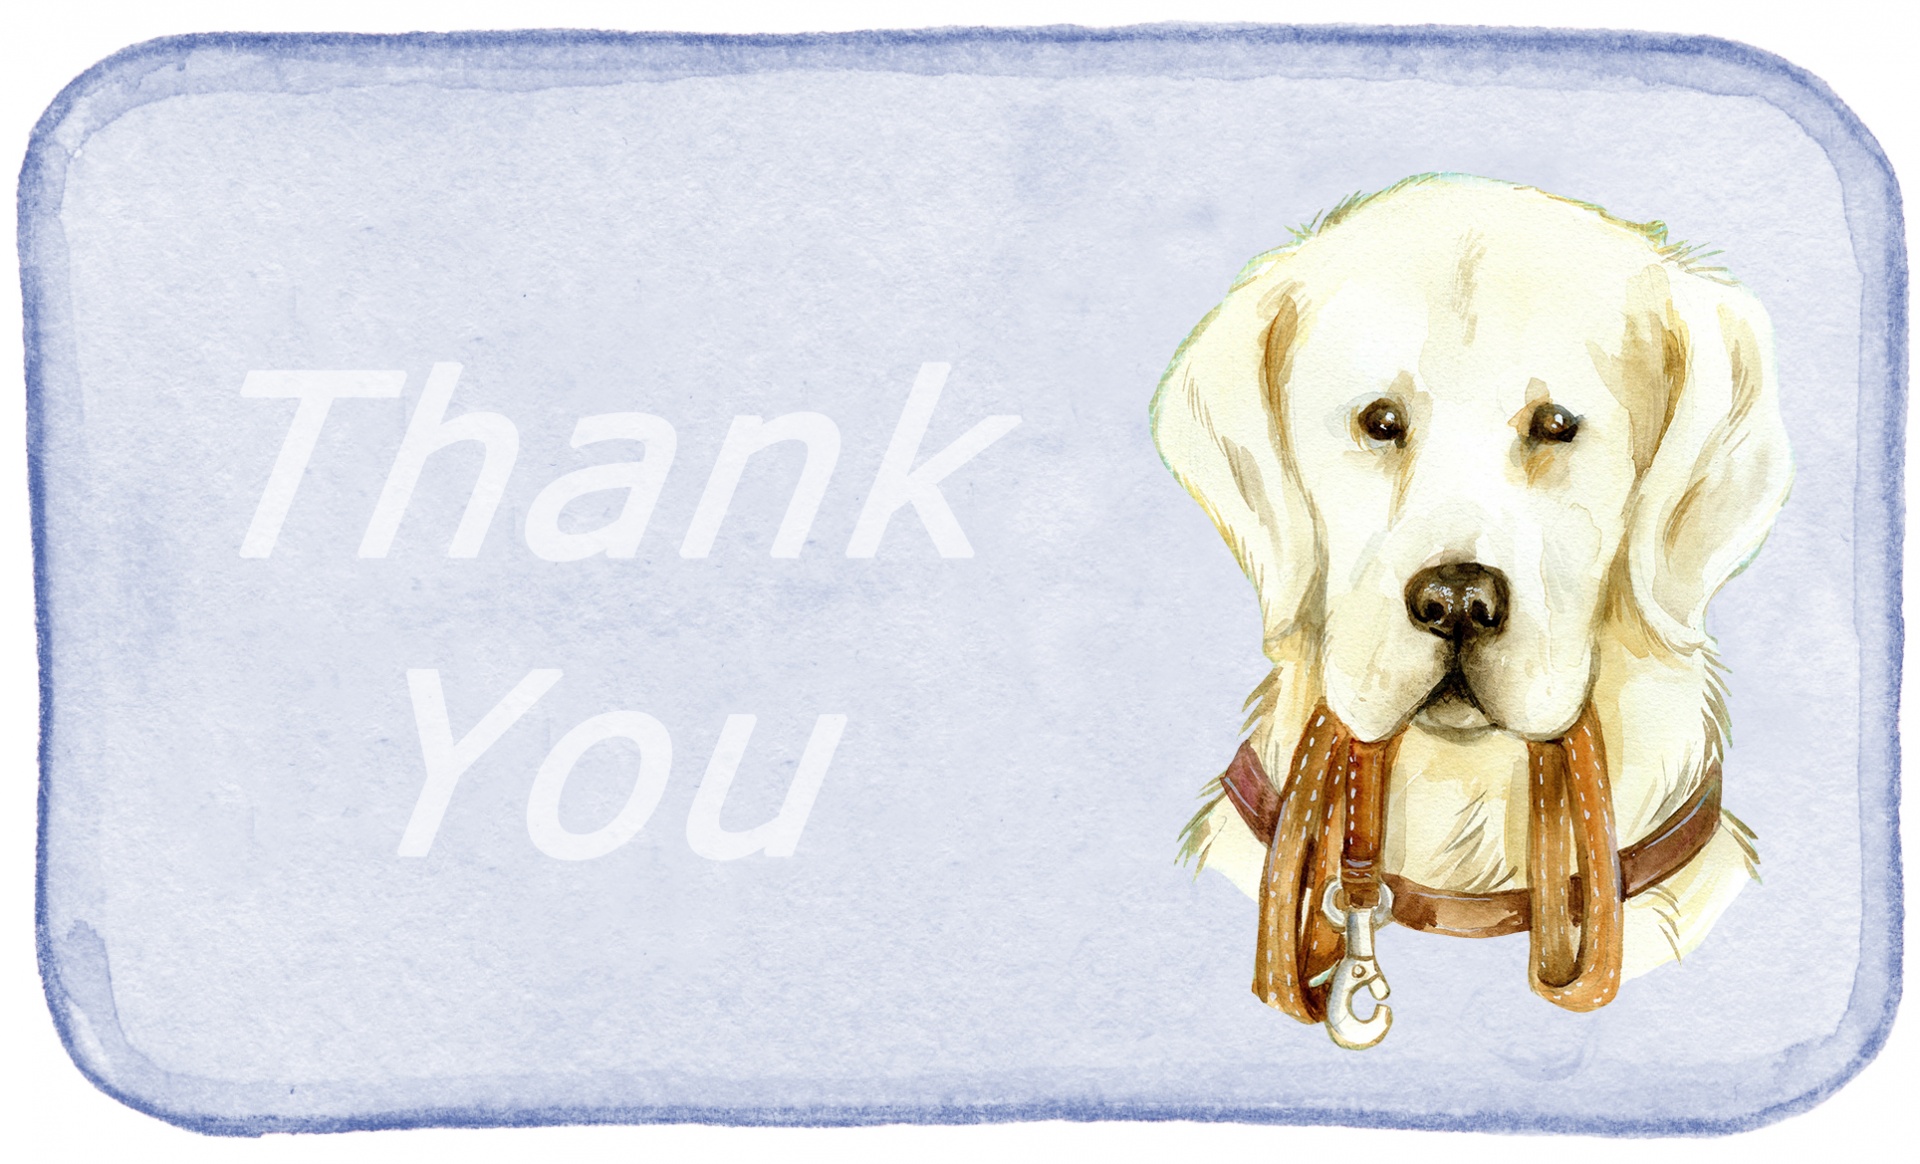 Dog Golden Retriever Card: Watercolor painting of a golden retriever dog holding a leash